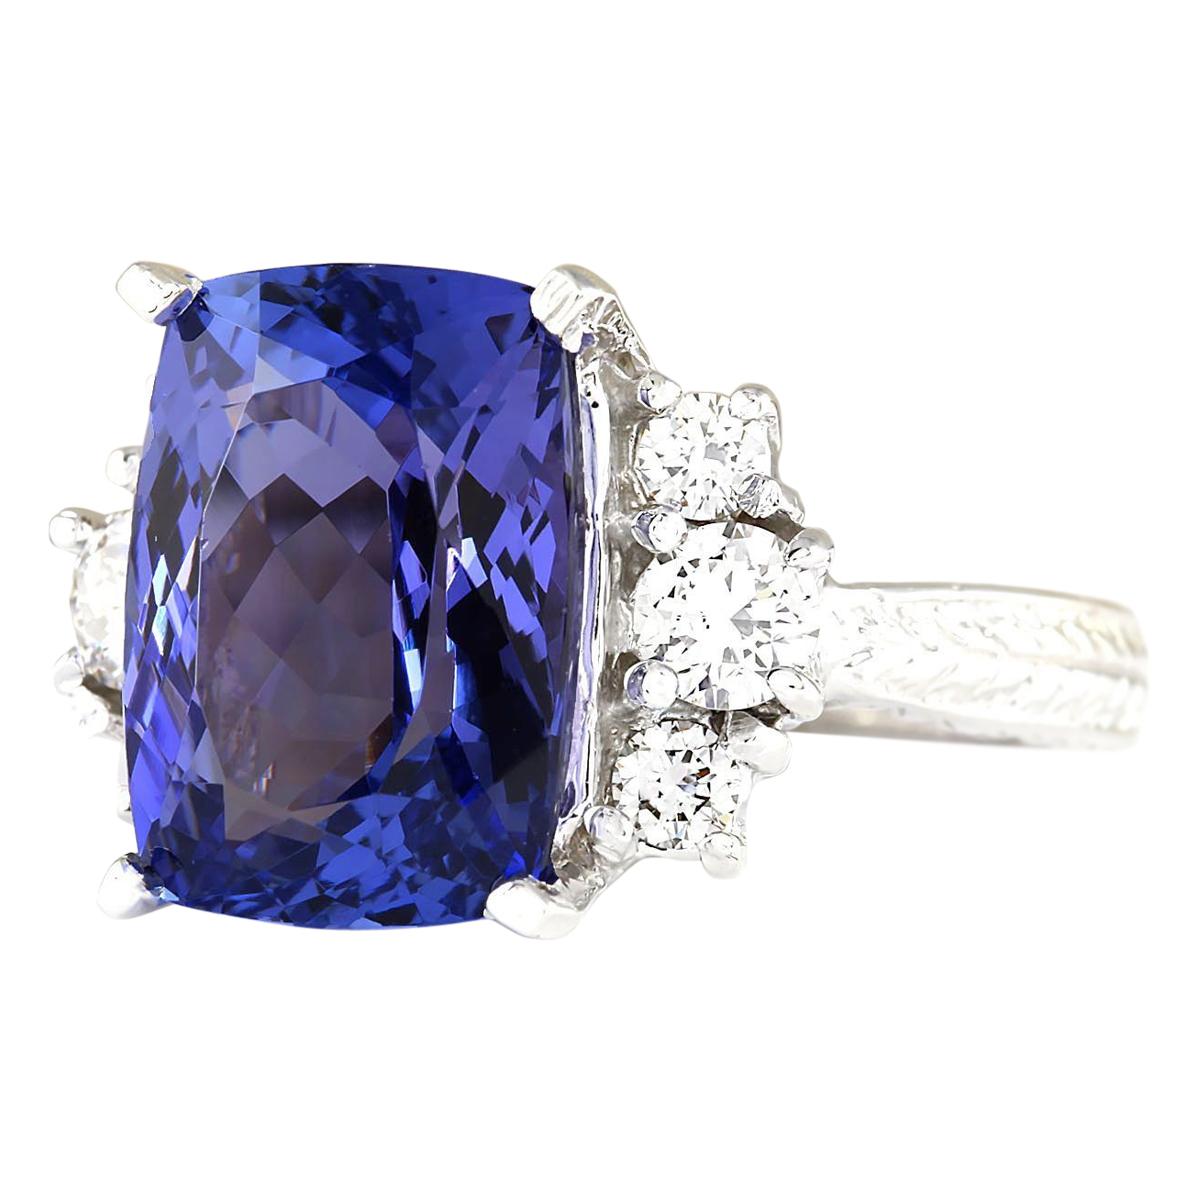 Introducing our exquisite 7.10 Carat Tanzanite 18 Karat White Gold Diamond Ring, a mesmerizing combination of sophistication and elegance. Crafted from luxurious 18K White Gold, this stamped ring weighs 6.7 grams, ensuring both quality and